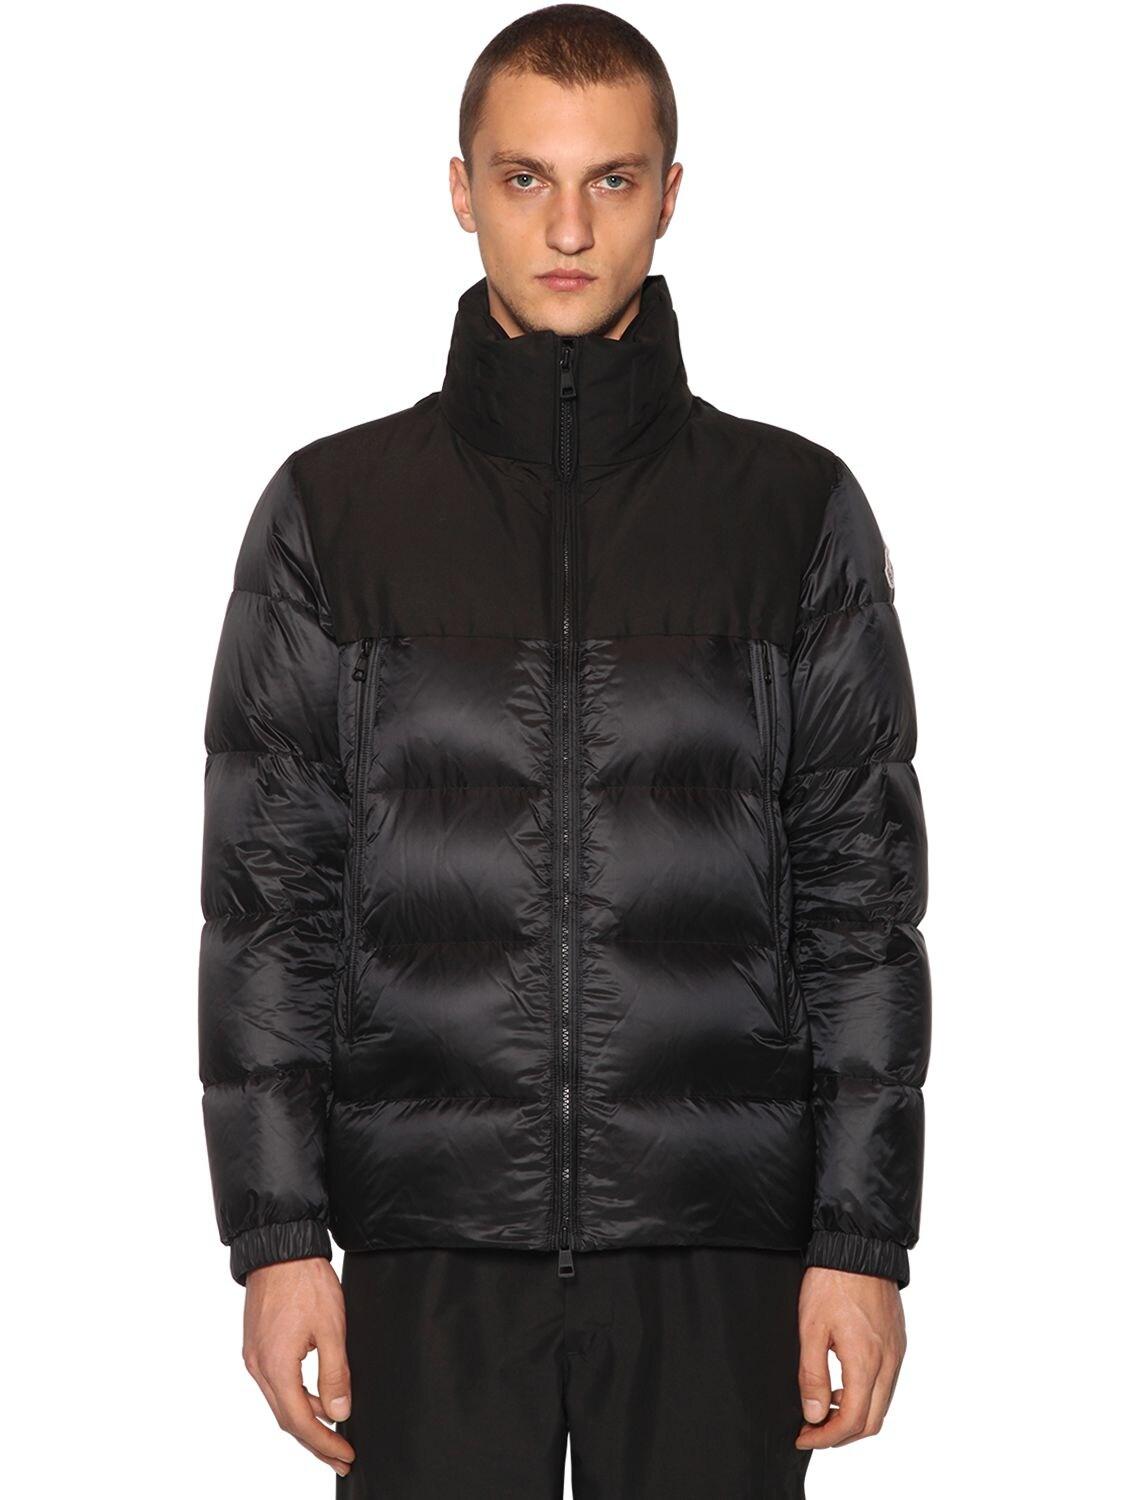 Moncler Synthetic Faiveley Nylon Down Jacket in Black for Men - Lyst